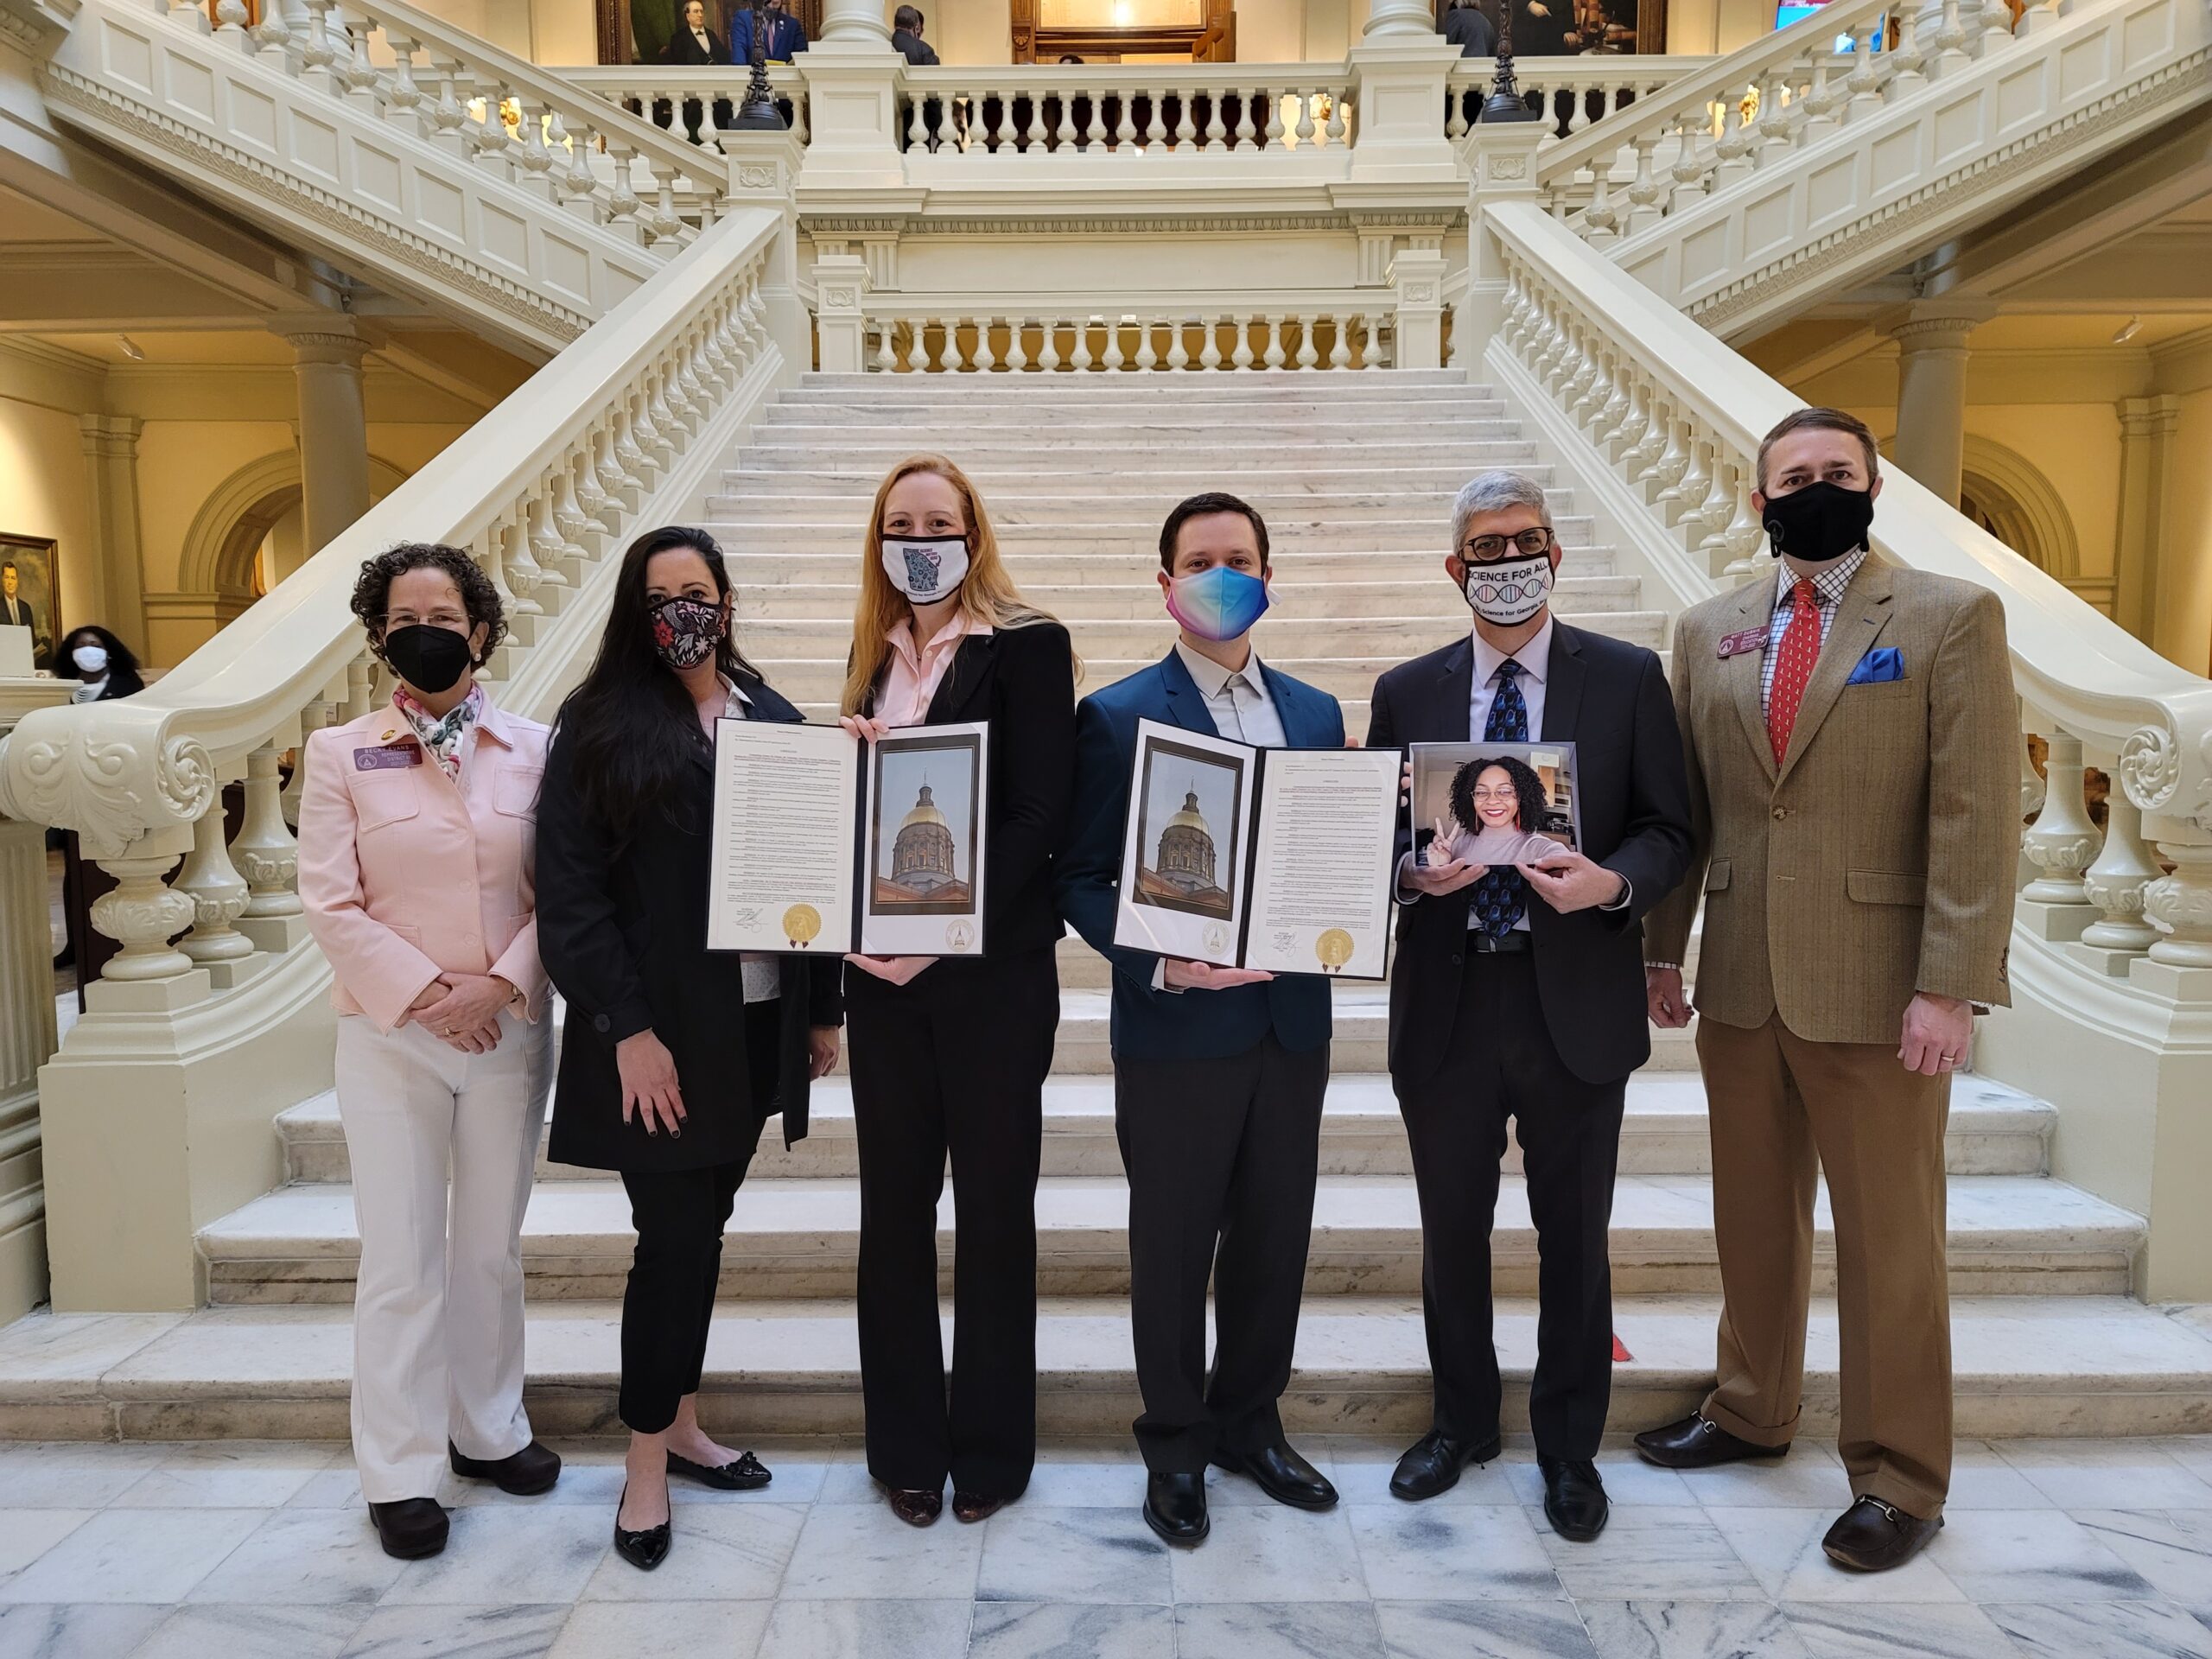 From left to right, Rep Becky Evans, Amy Sharma (Science for Georgia), Karolina Klinker (Reach Out and Read), Louis Kiphen (Science for Georgia), Randy Gorod (Sci4Ga - holding a photo of Paige Greenwood), and Rep Matt Dubnik.